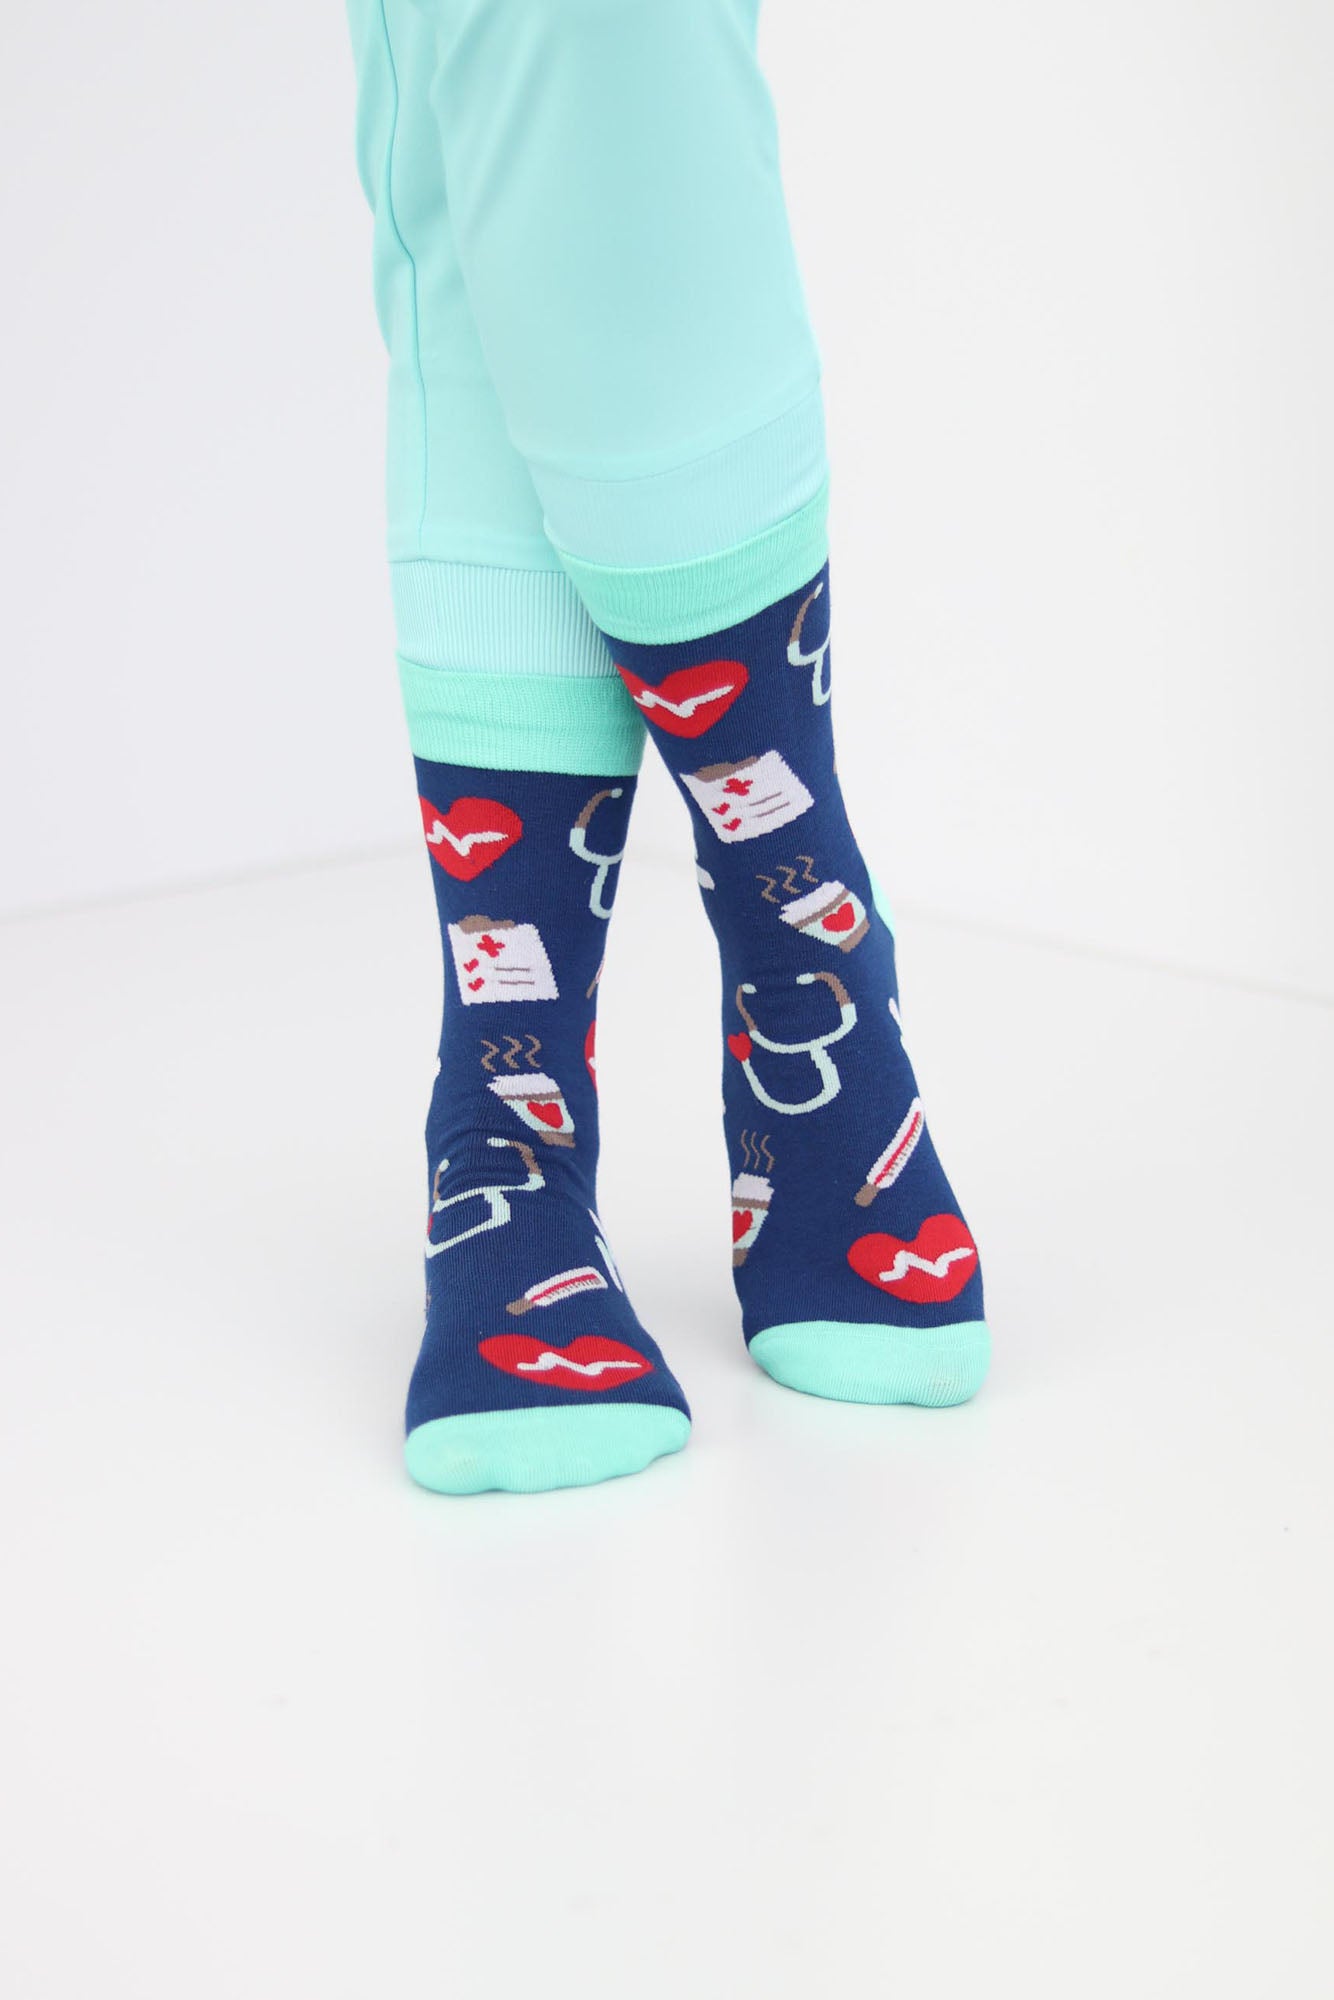 Paramedic socks with paramedic medical icons printed on it